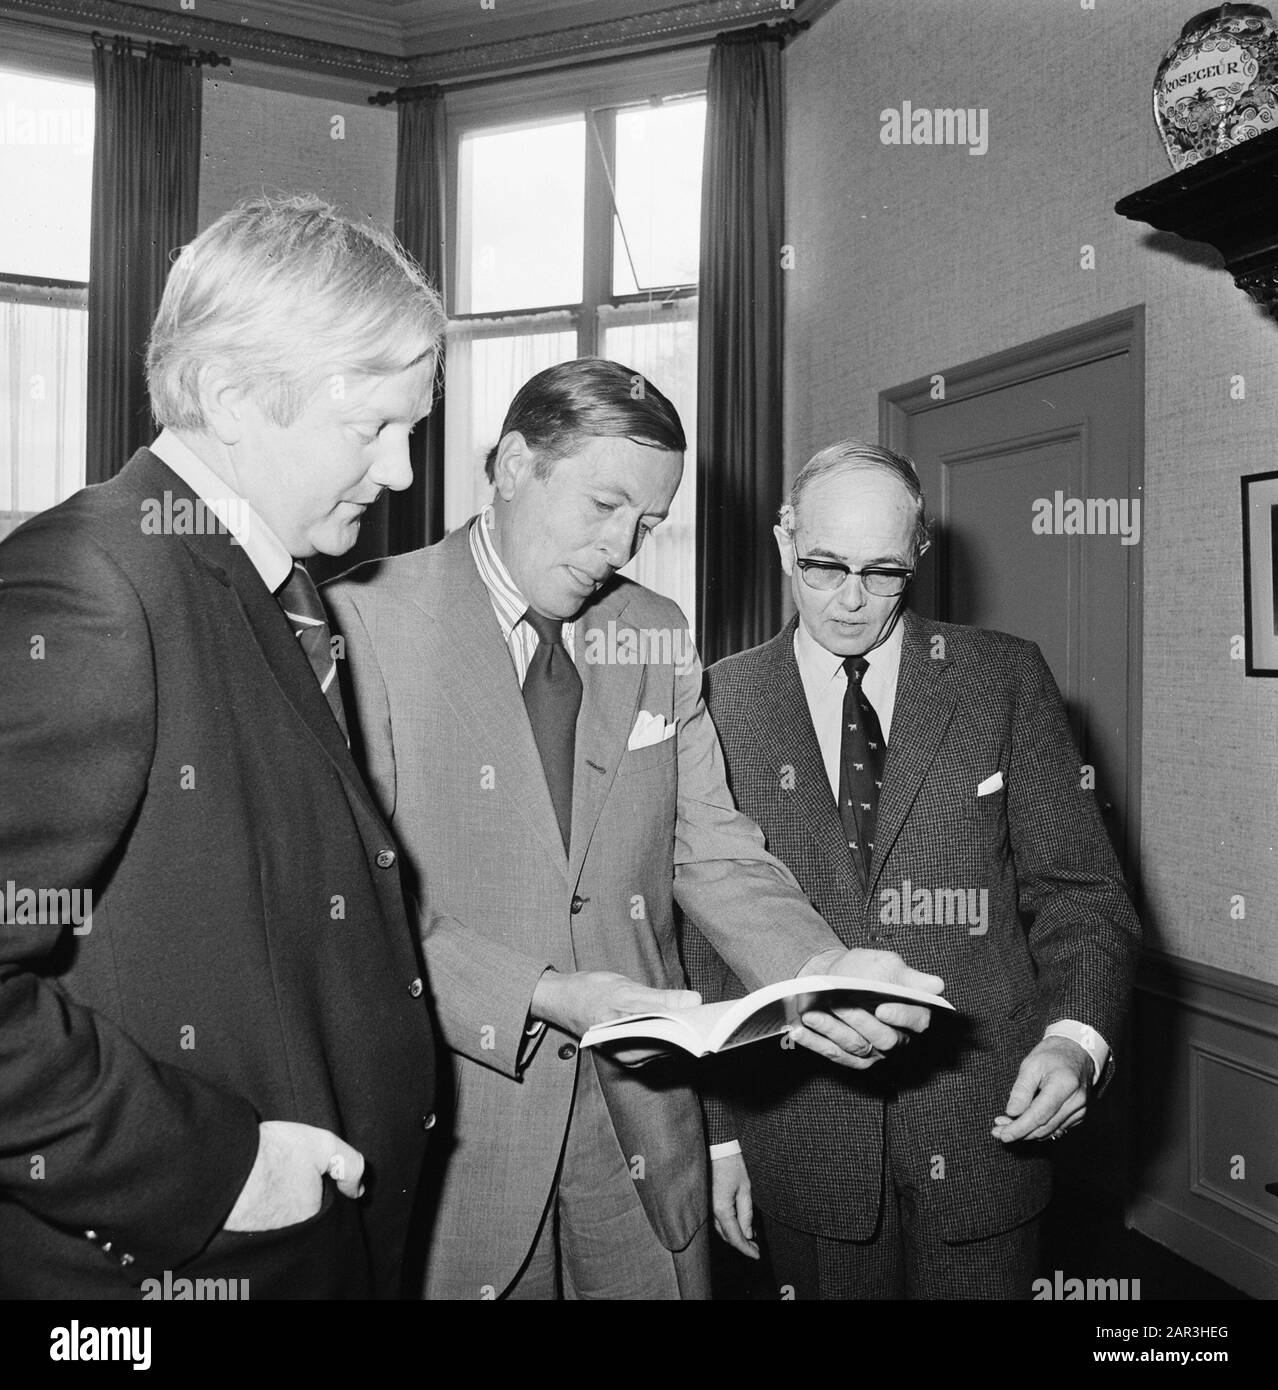 Prince Claus gets a book of Natuurmonumenten handed over  Prince Claus looks at the book, watched by Wouter van Dieren (l., member Club of Rome) and Marius Wagenaar Hummelinck (chairman World Nature Fund) Date: 19 april 1977 Location:'s Graveland, Utrecht Keywords: books, nature management, princes Personal name: Claus (prince Netherlands), Animals, Wouter van, Wagenaar Hummelinck, Marius Stock Photo